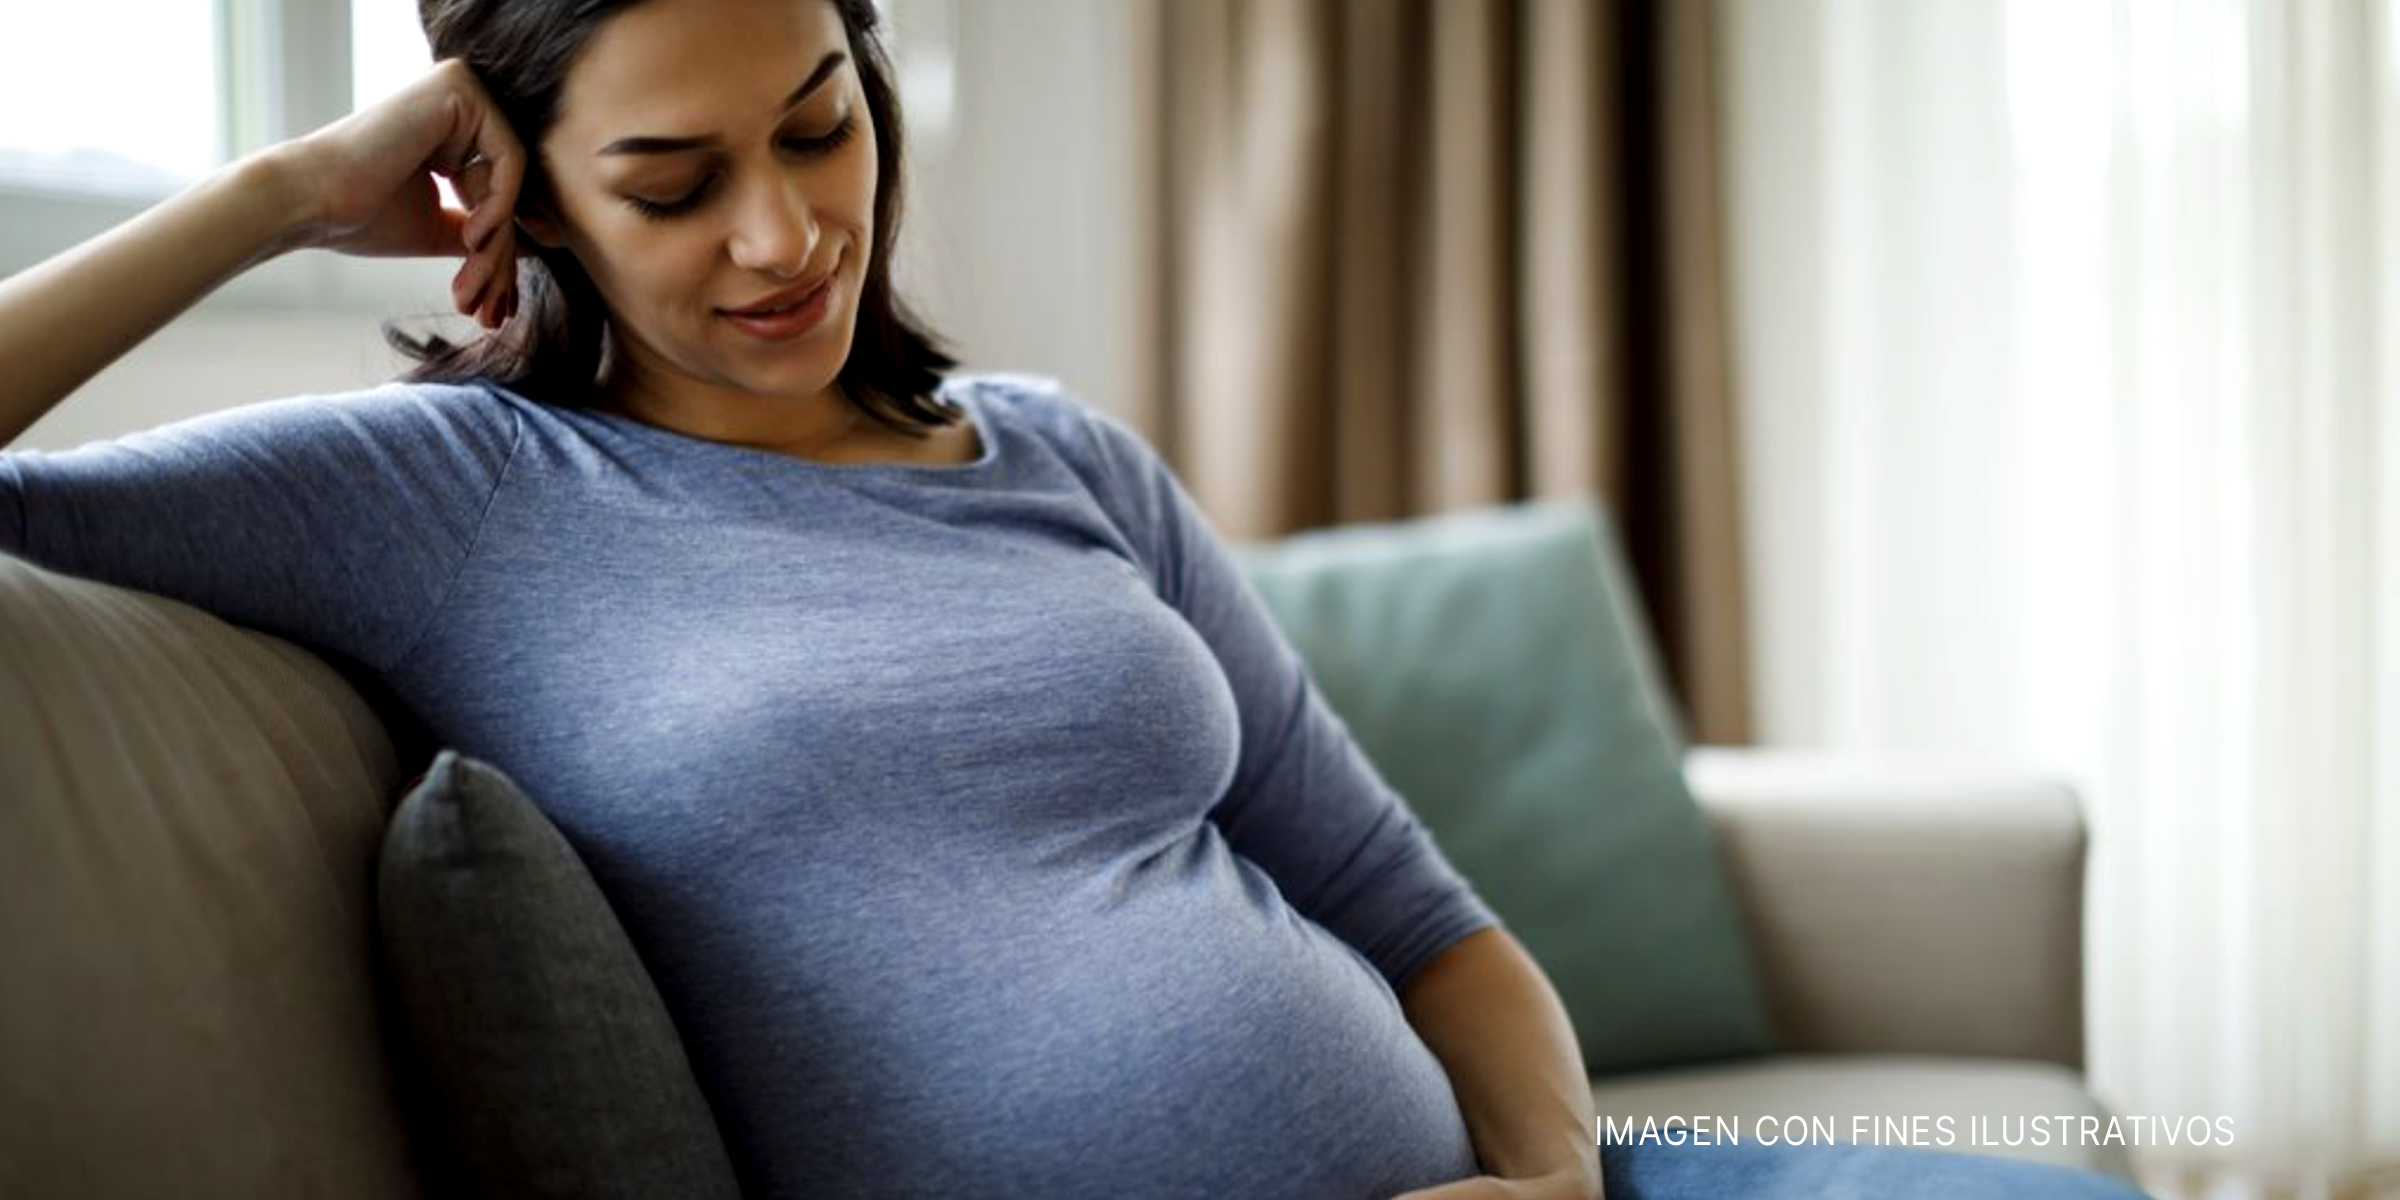 Pregnant woman | Source: Getty Images